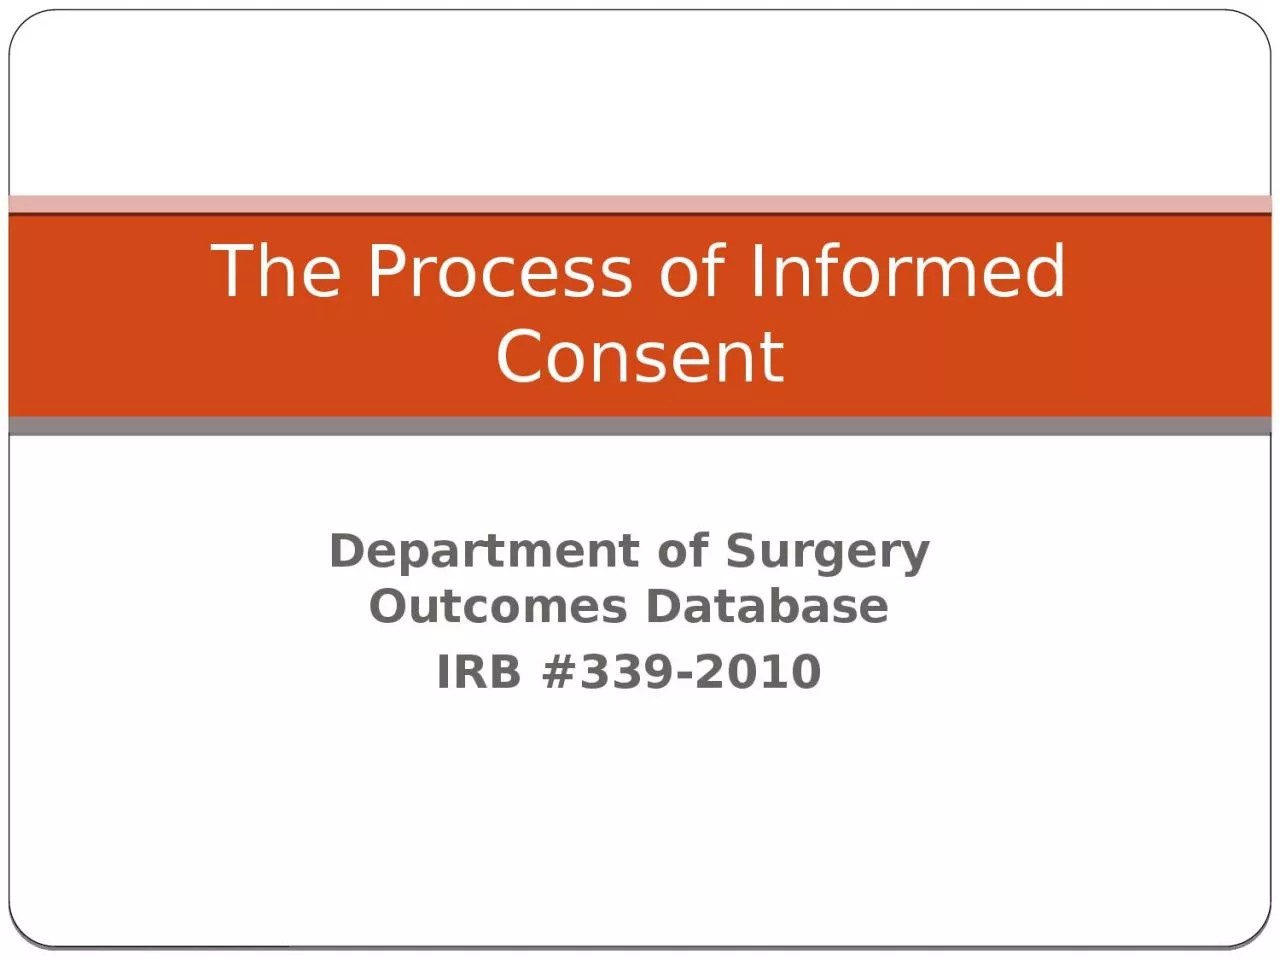 Department of Surgery Outcomes Database